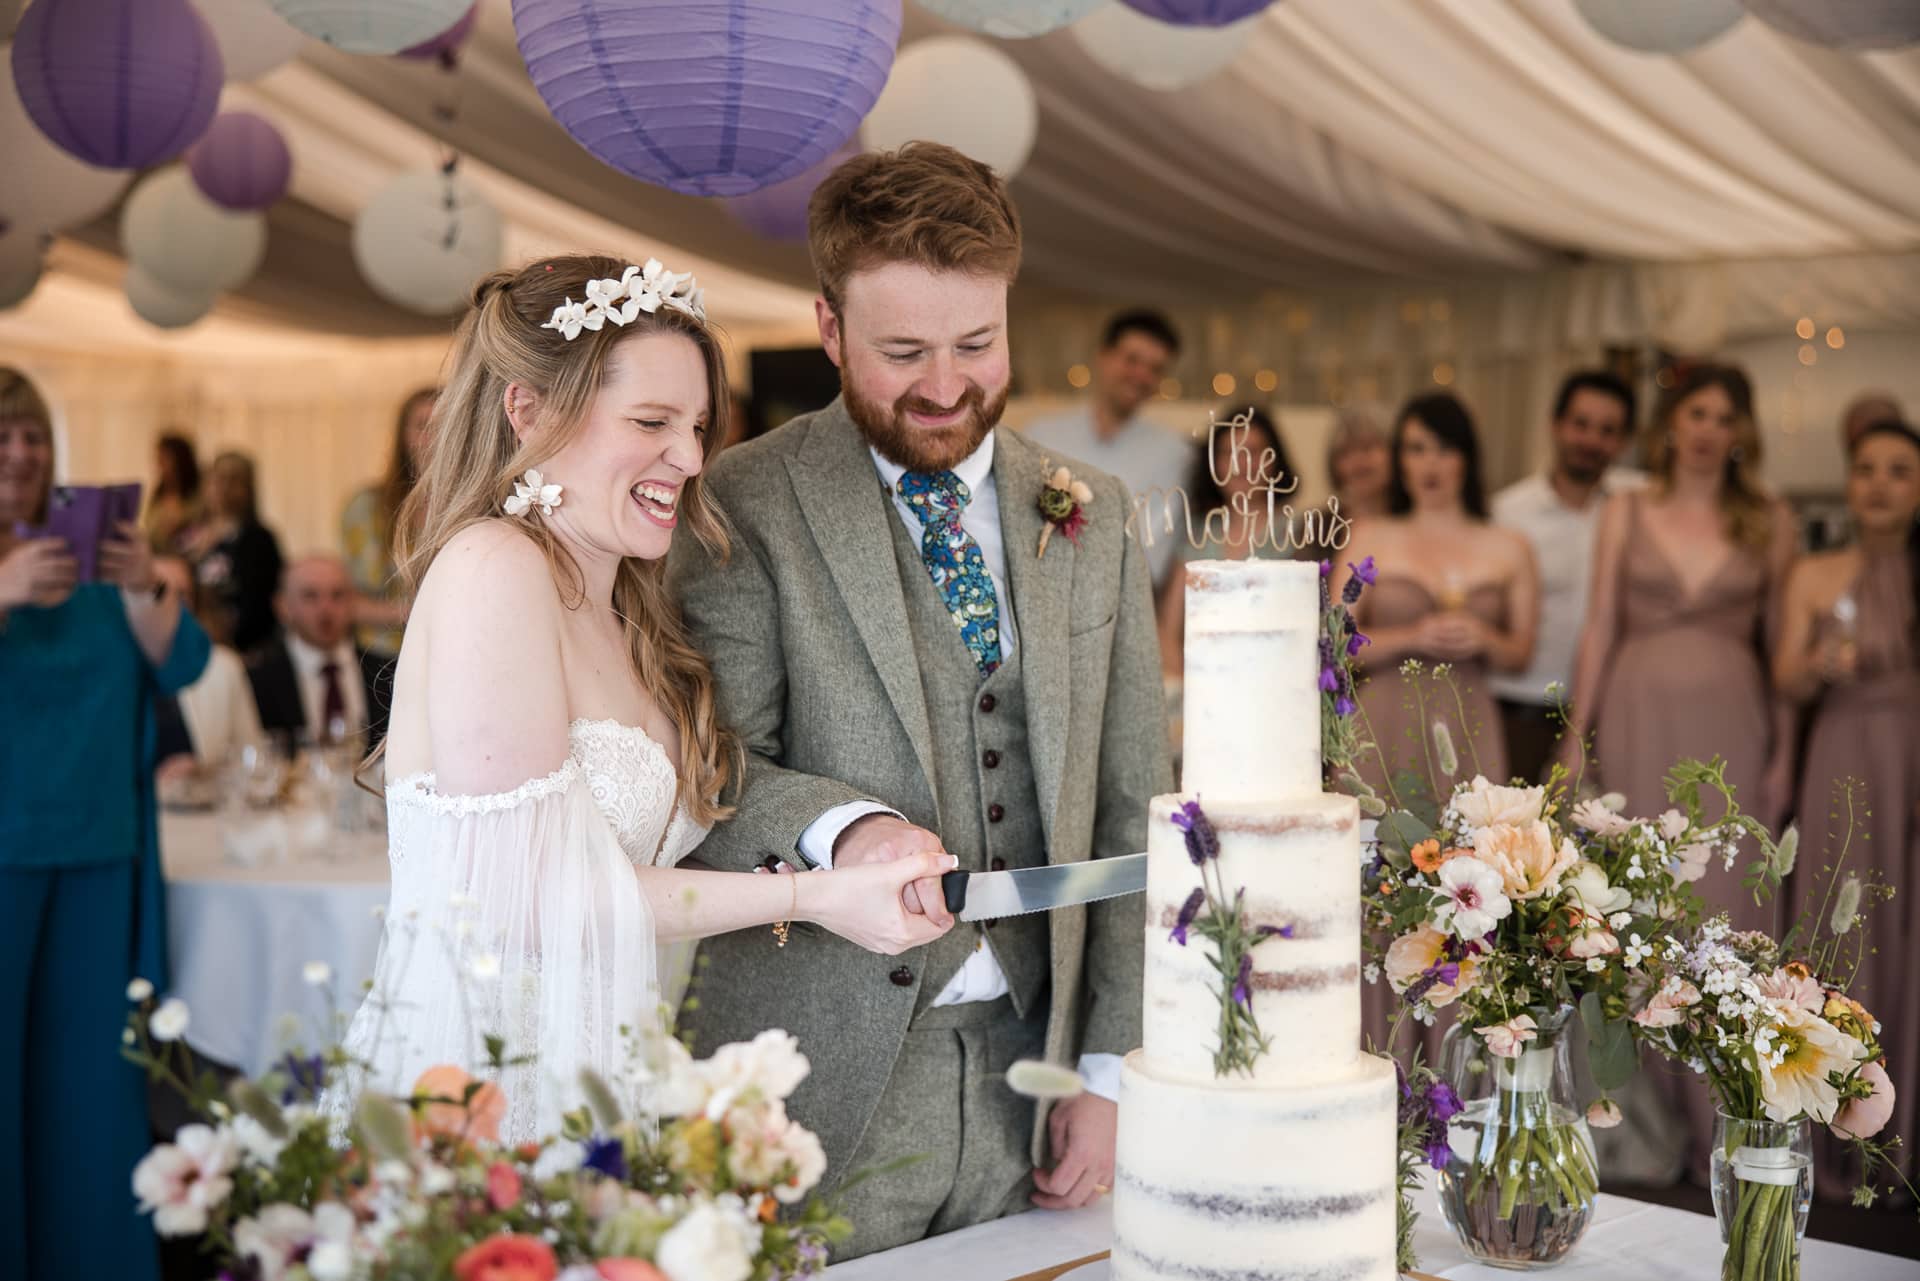 Bride and Groom cutting the wedding cake at the Cherwell Boathouse